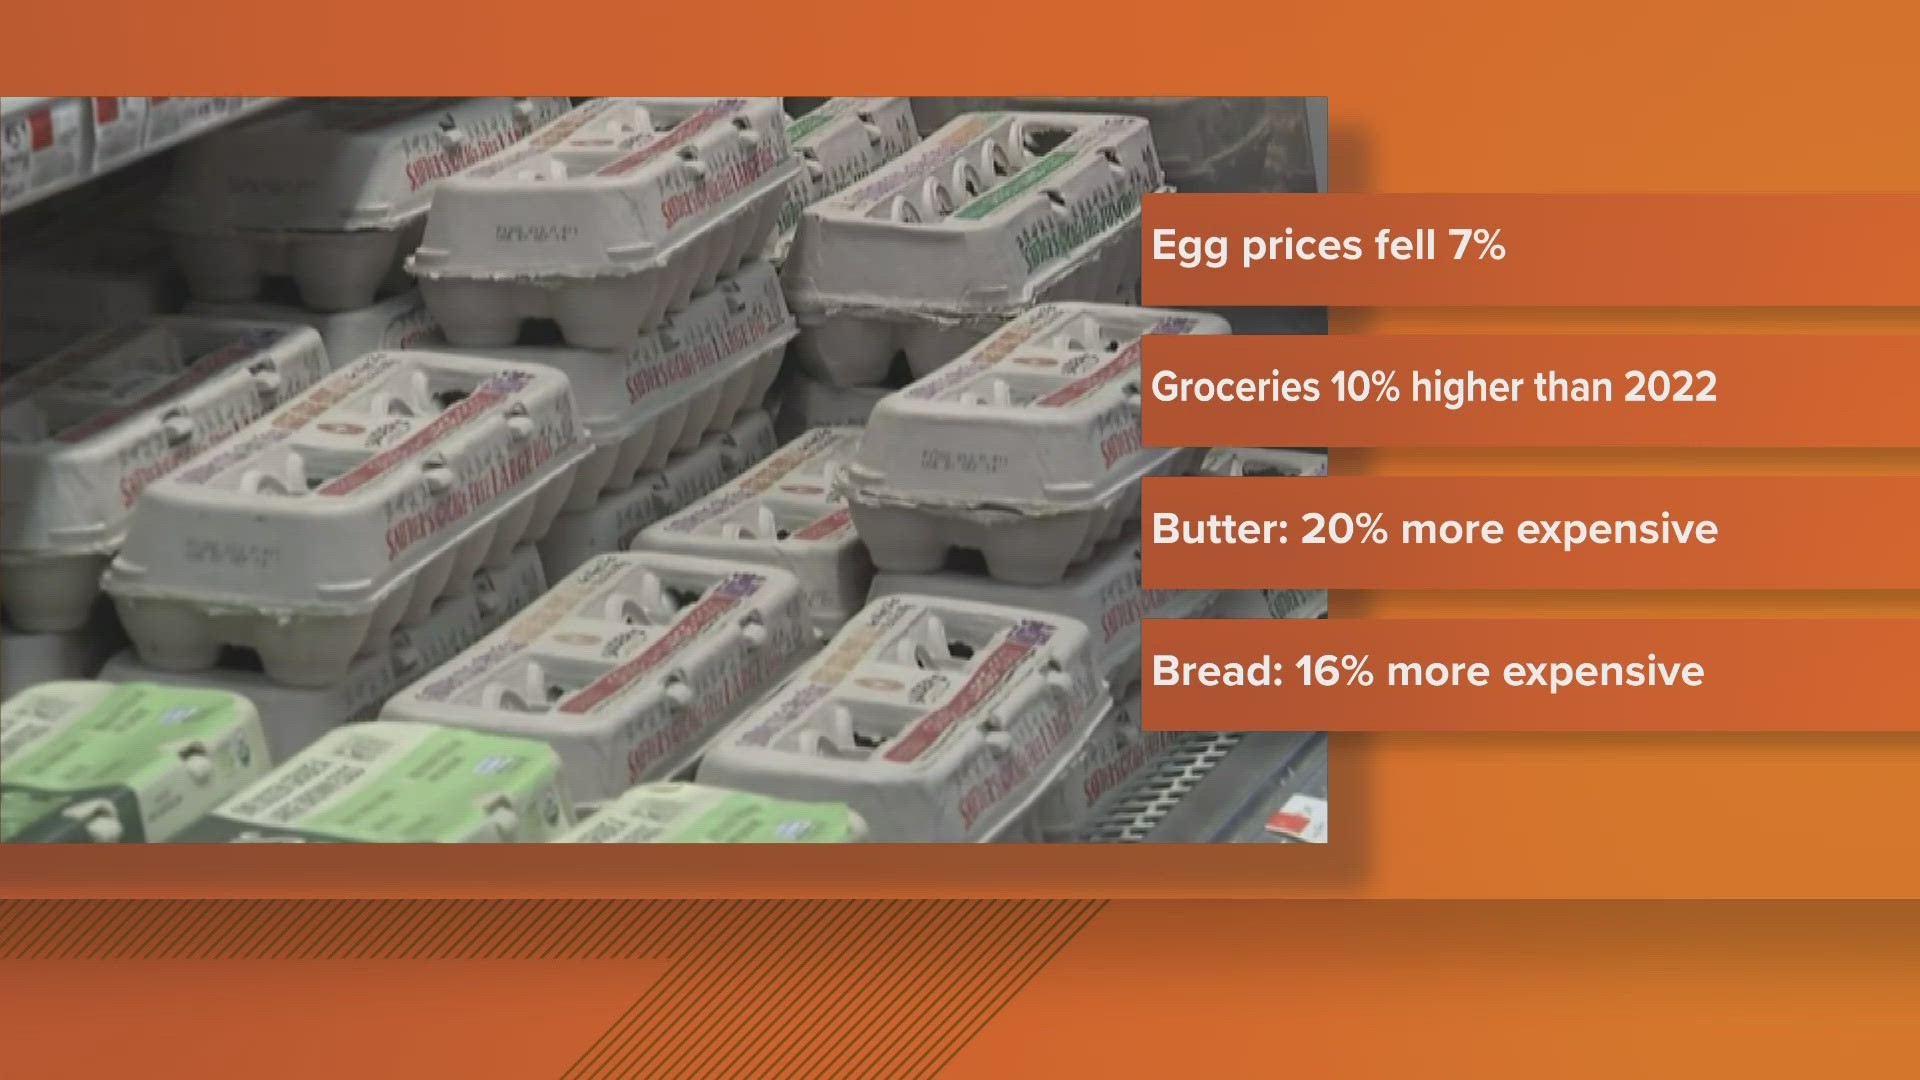 Data from the Bureau of Labor Statistics shows that prices have fallen slightly for eggs, but they still cost more than before.